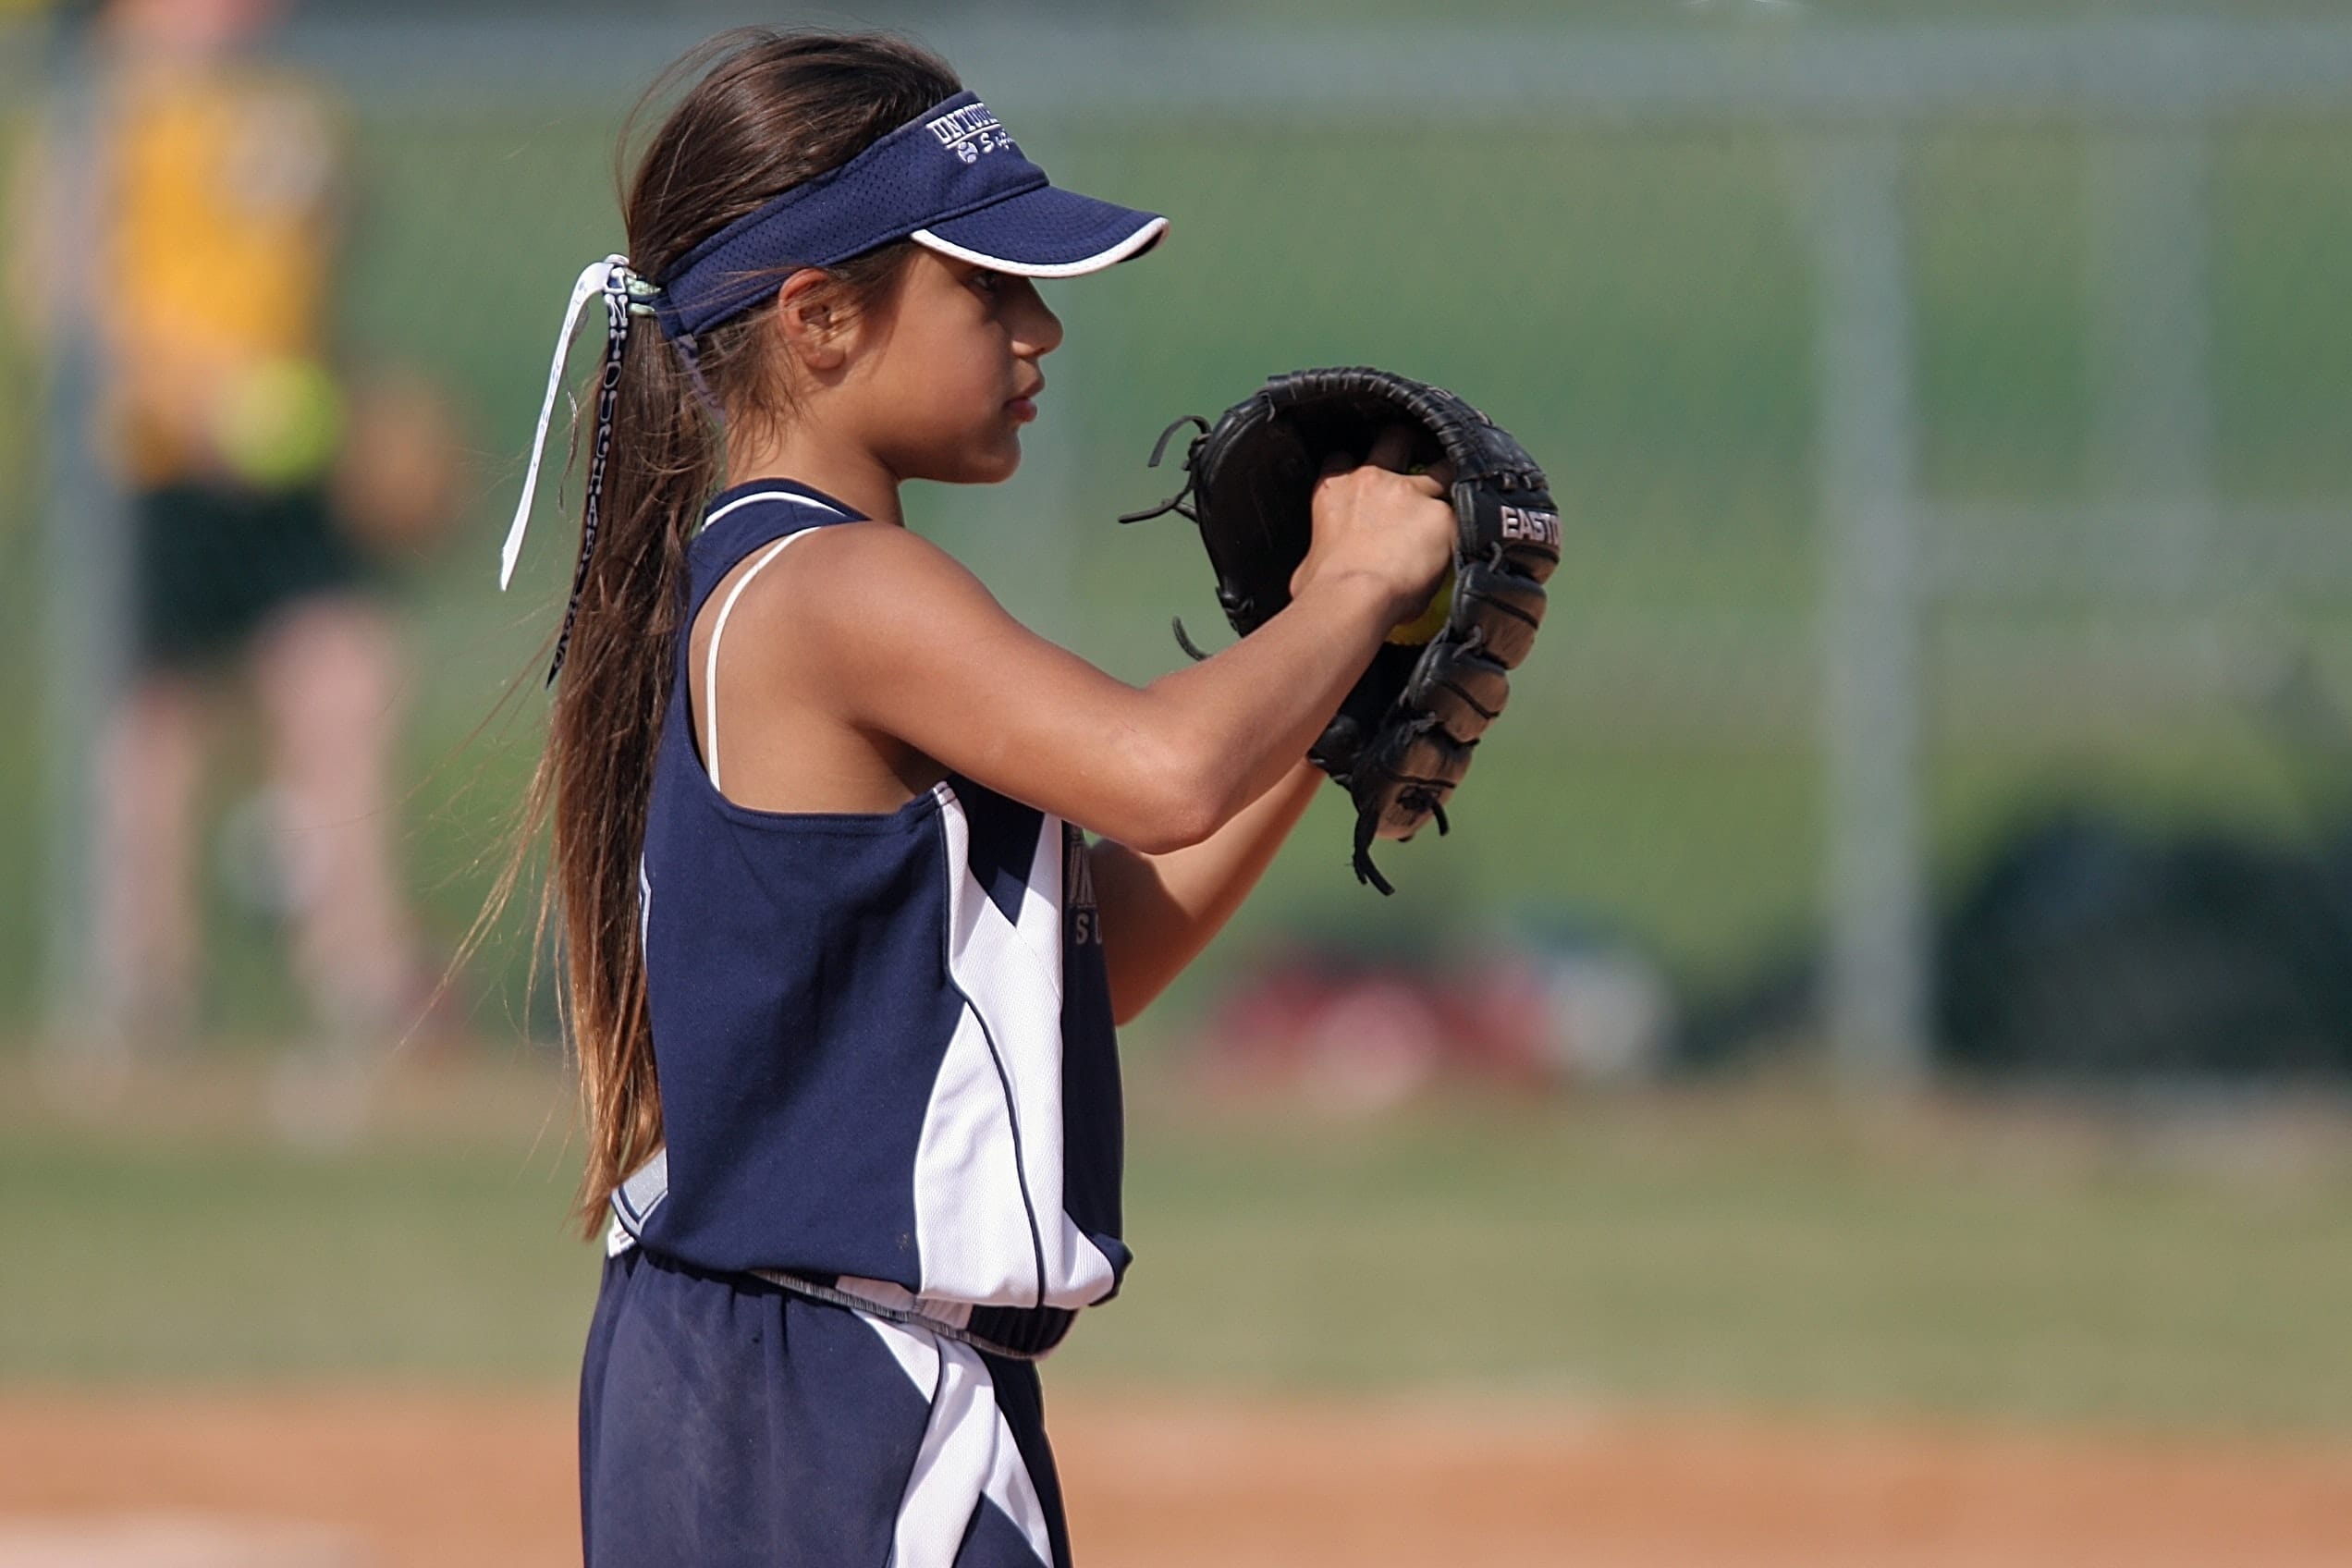 Girl on a baseball diamond in uniform with her right hand in her gloved left hand.